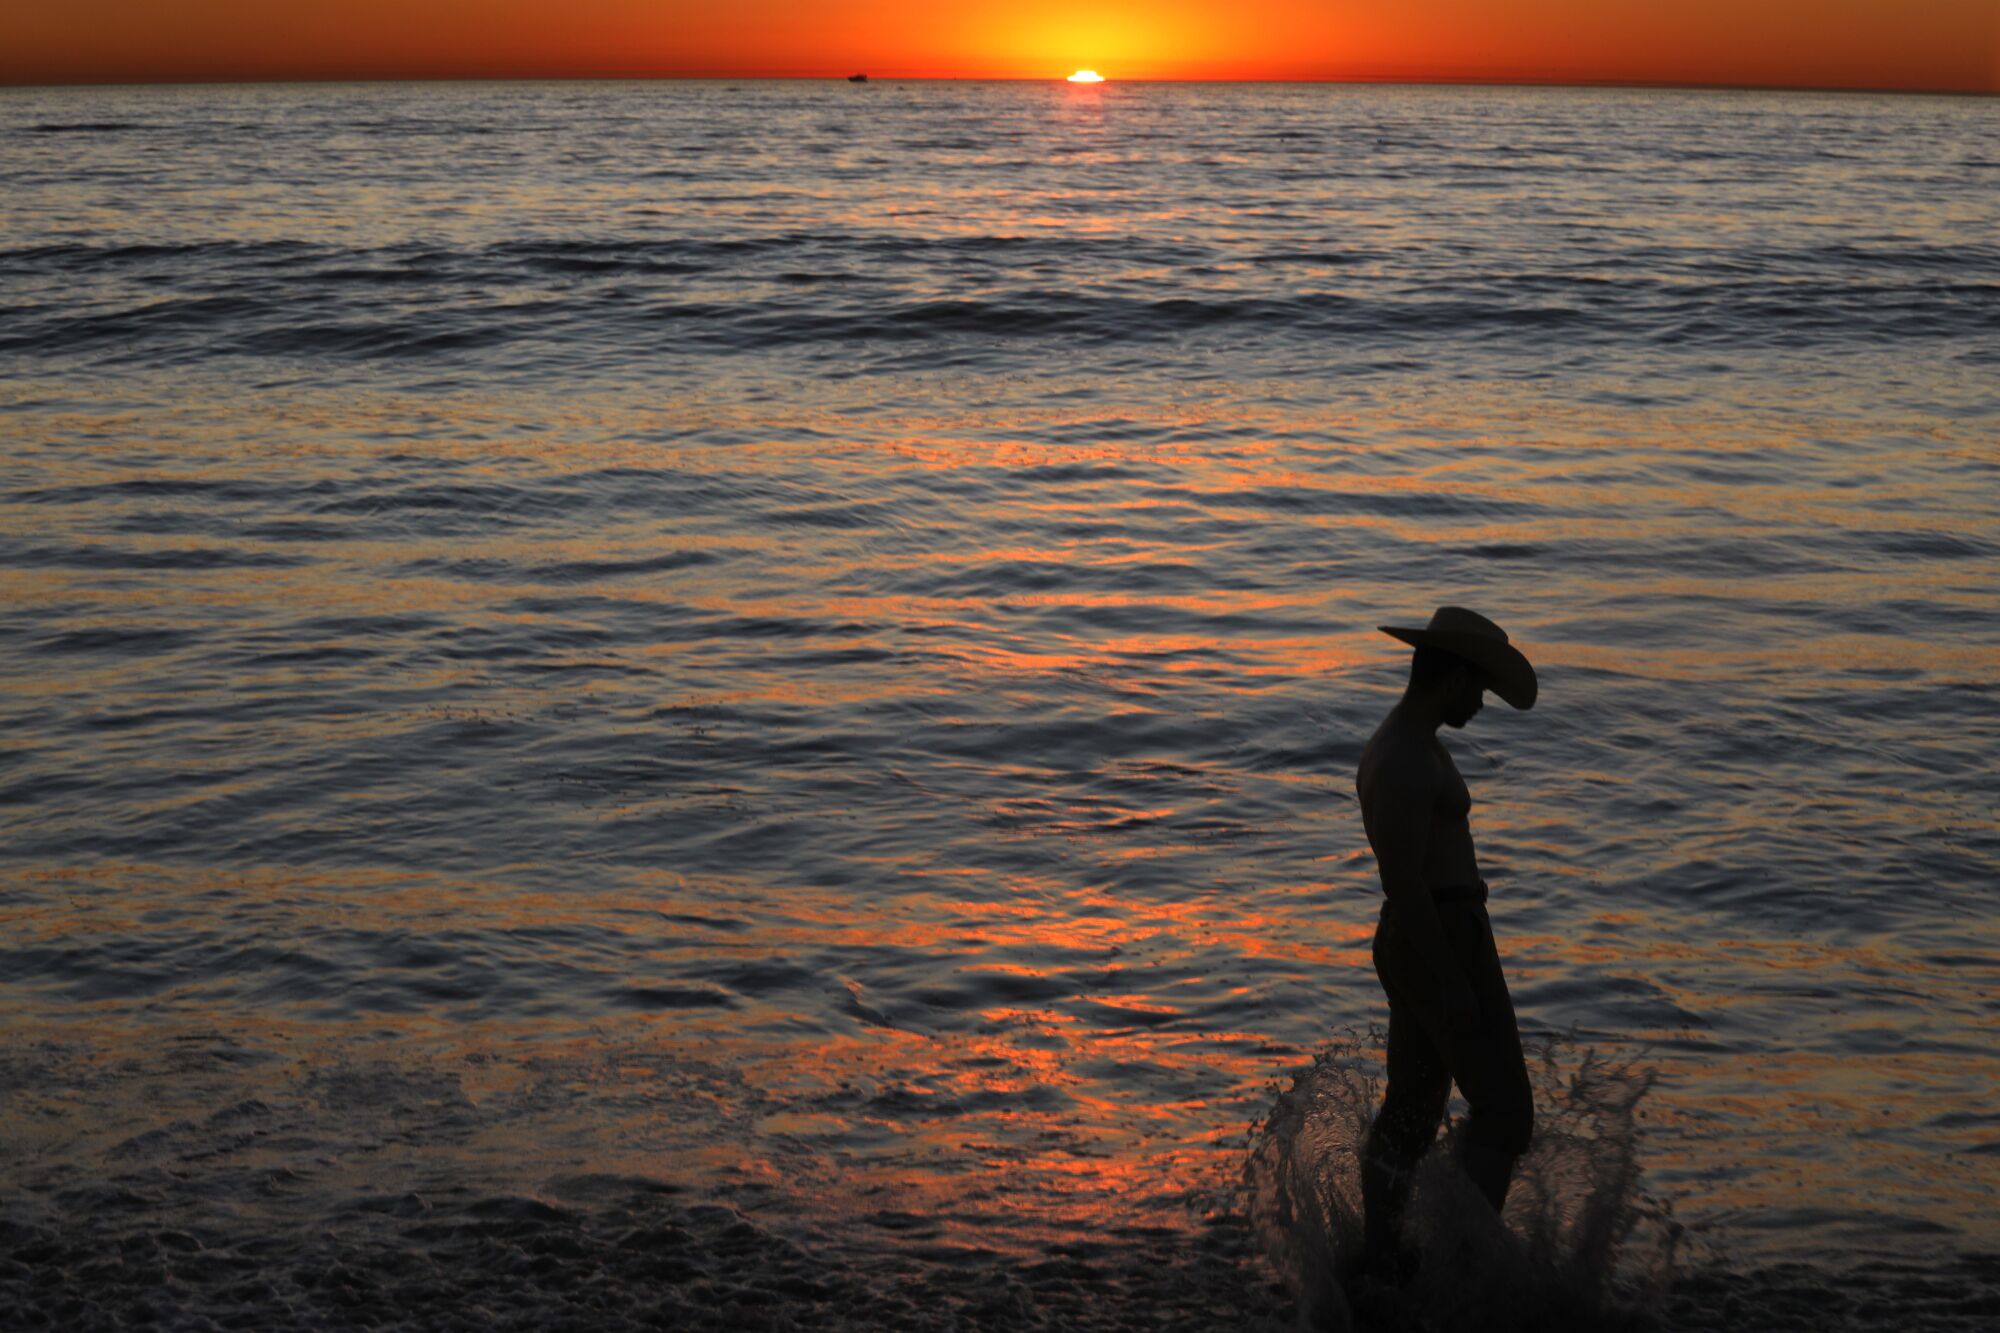 Michael Sparks in silhouette with a cowboy hat on as the sun sets on the water behind him.